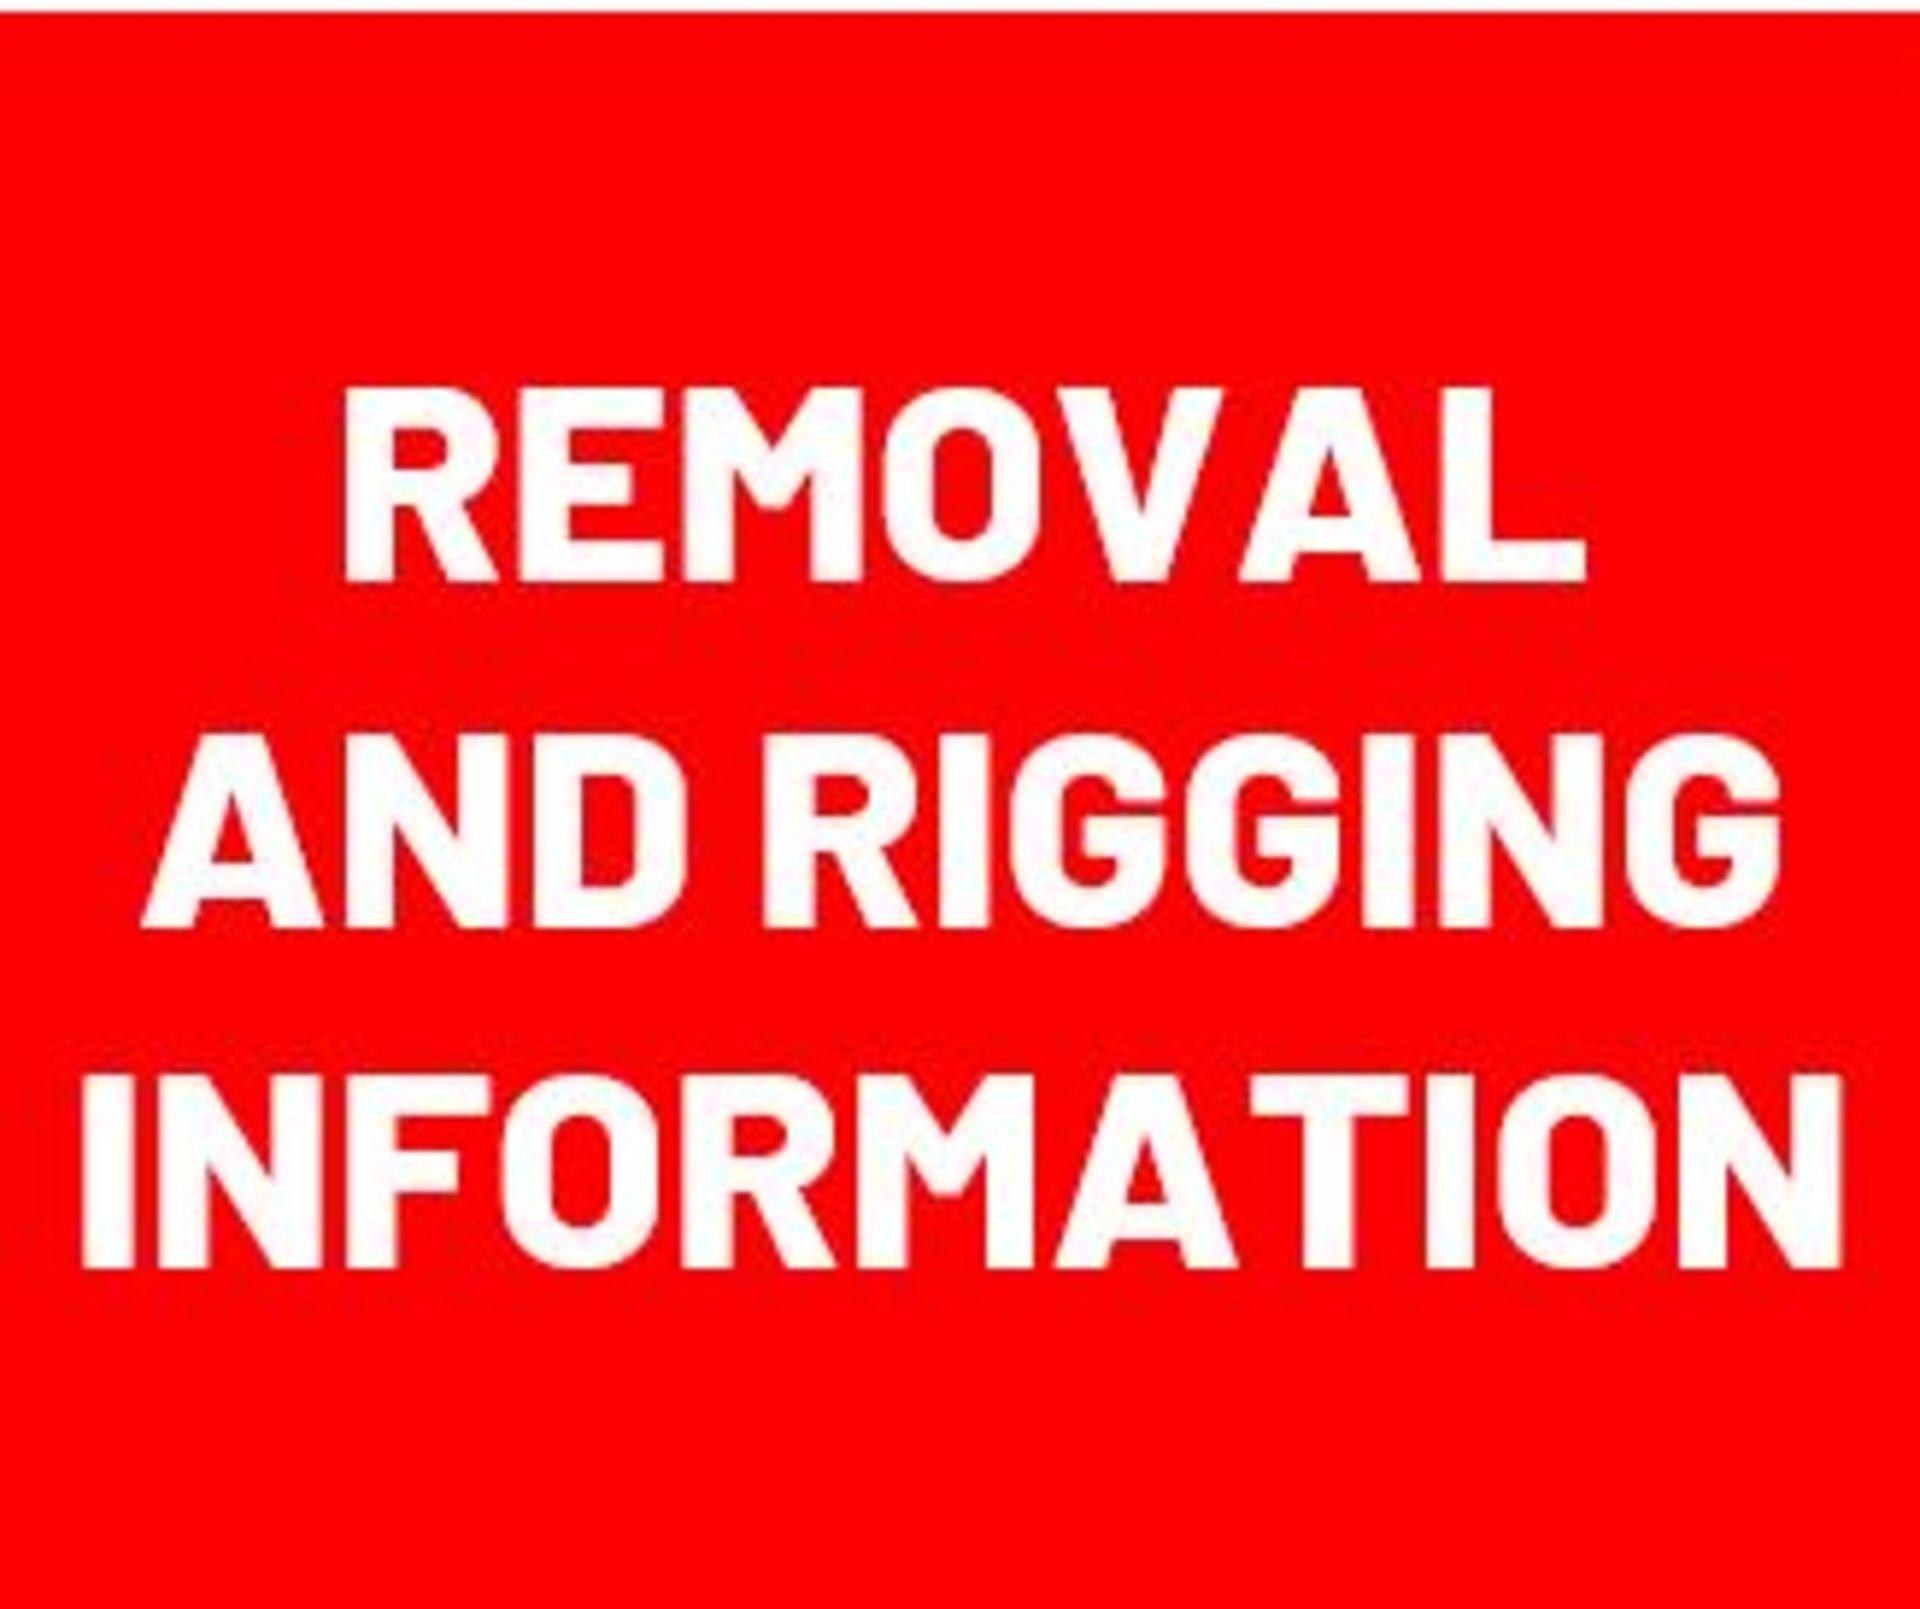 RIGGING AND REMOVAL